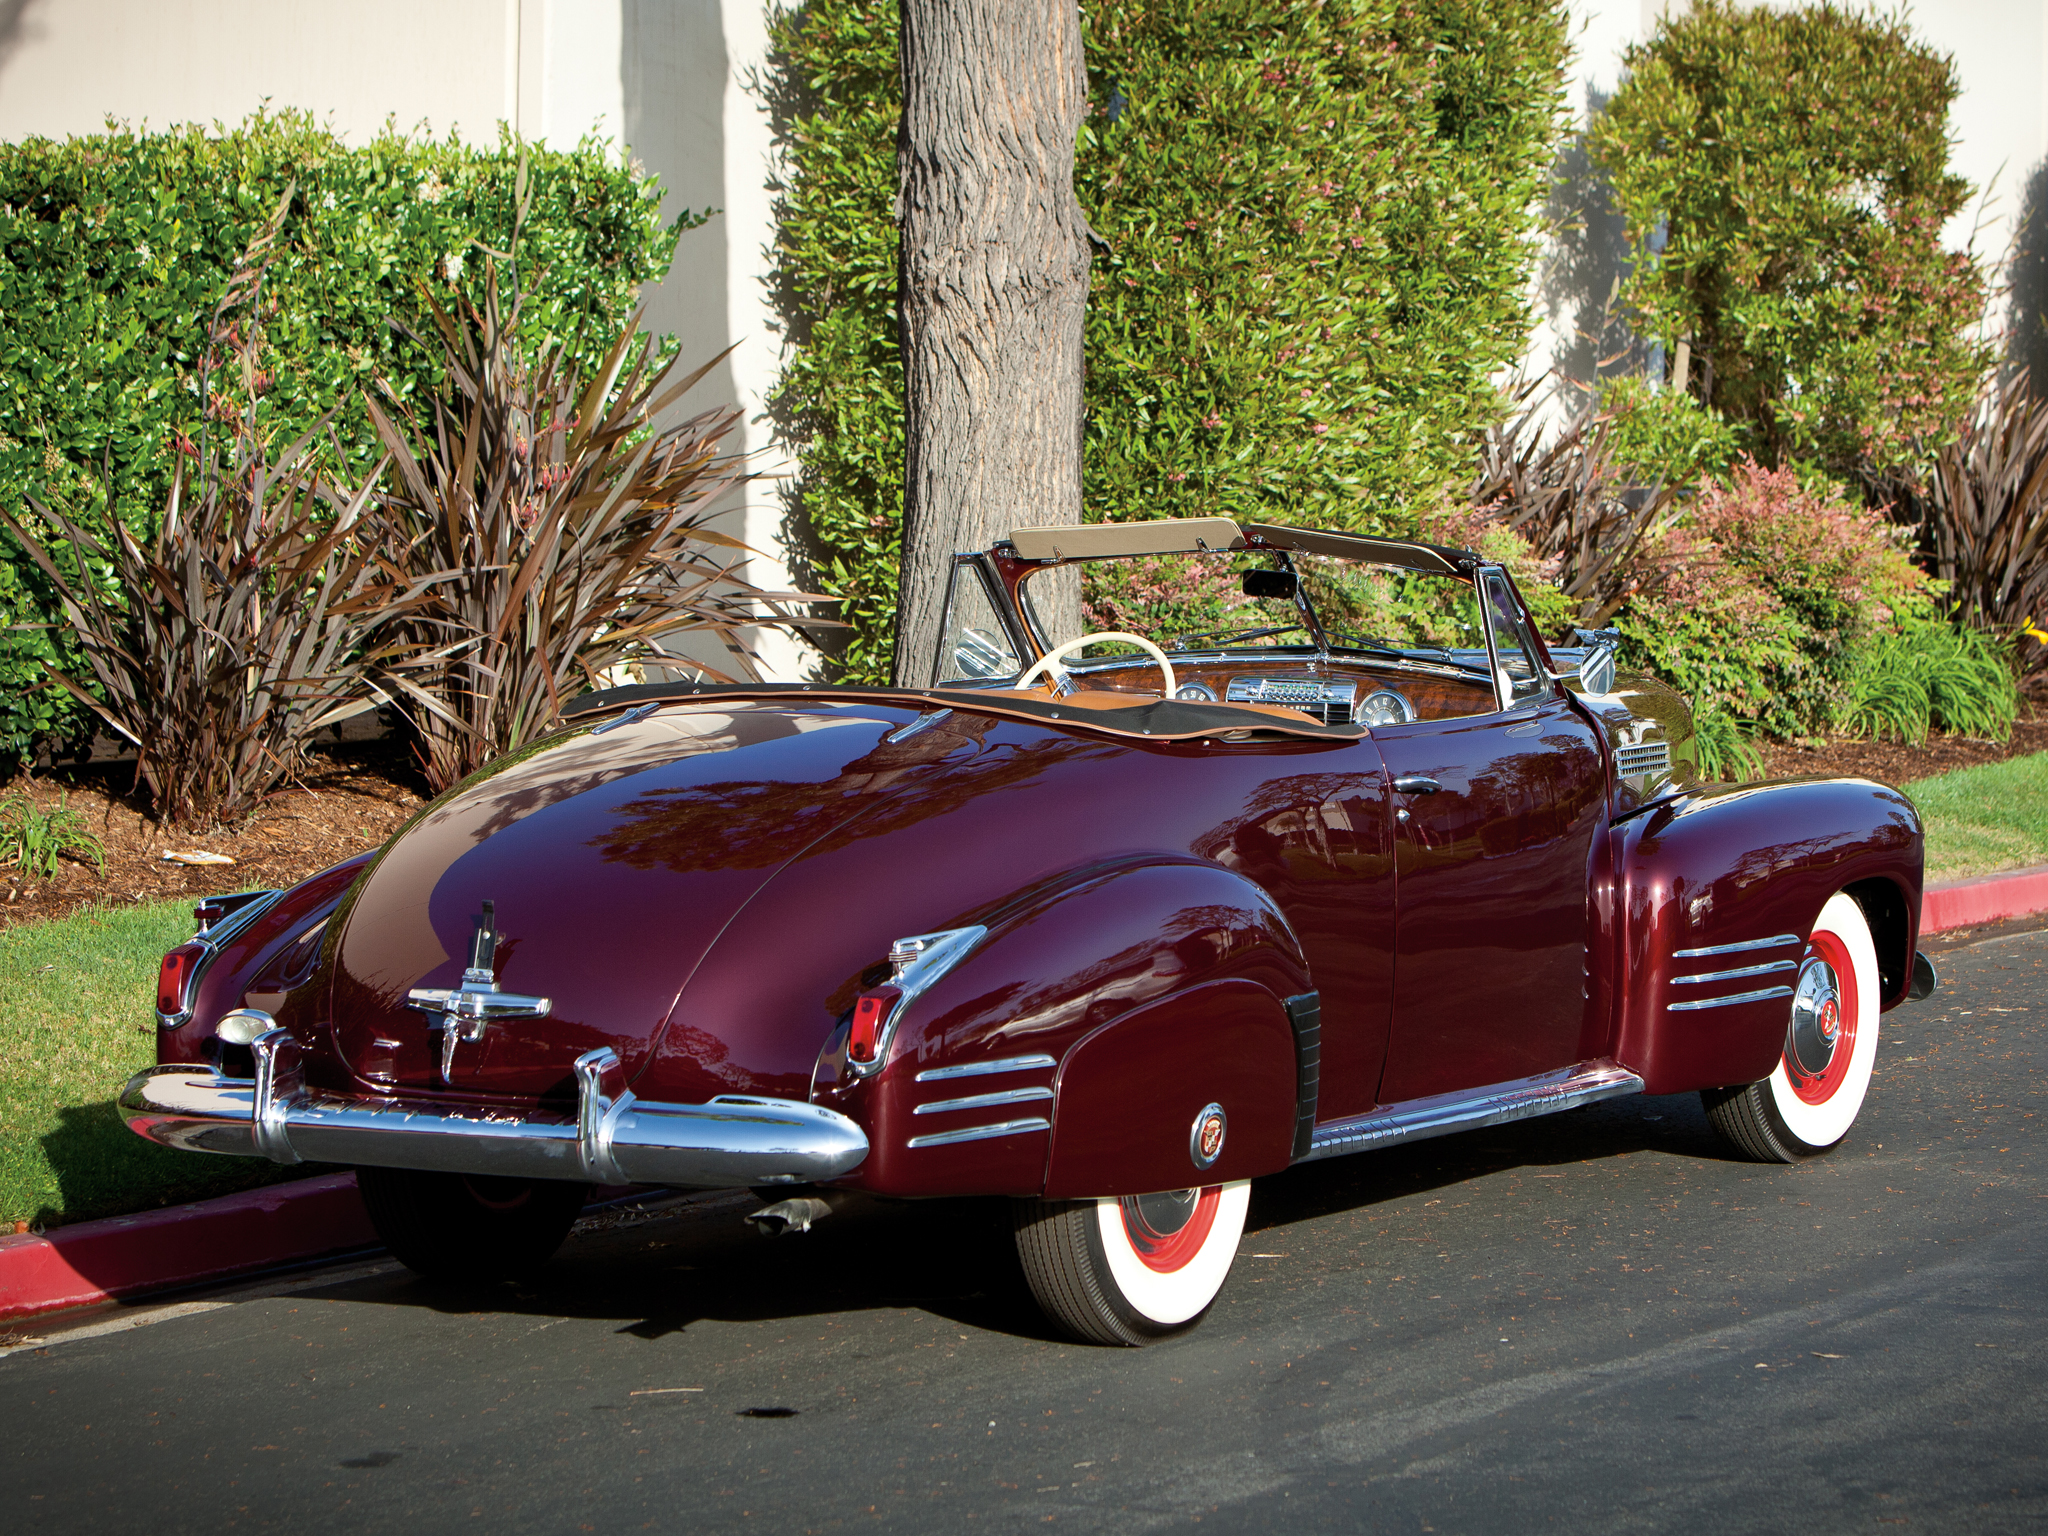 1941, Cadillac, Sixty two, Convertible, Coupe, Luxury, Retro, He Wallpaper